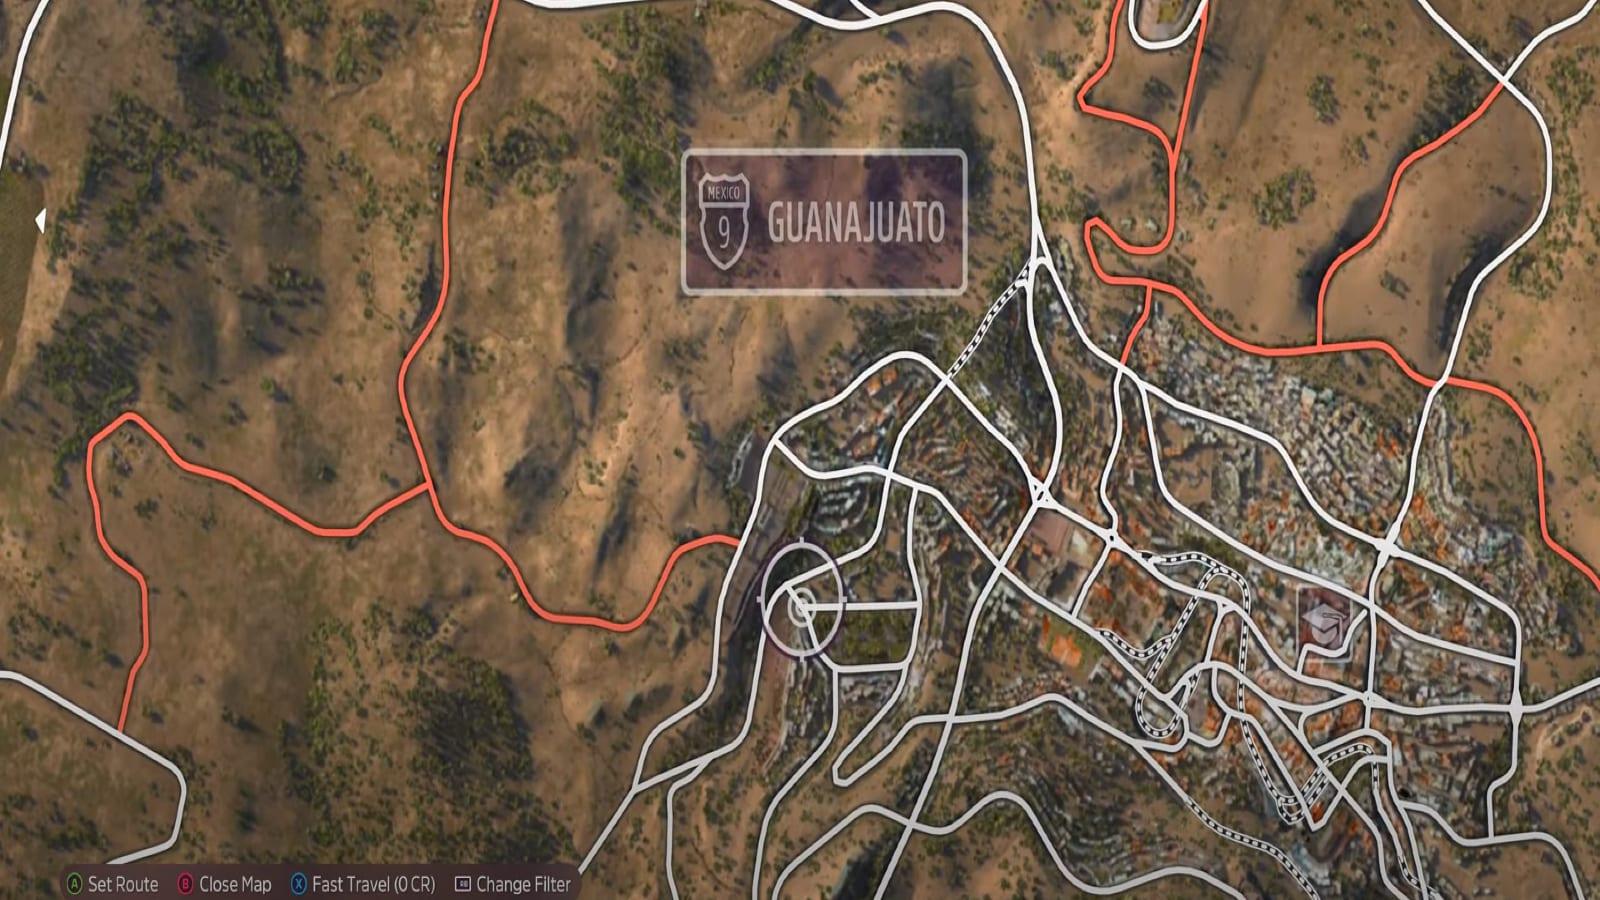 Guanajuato park in Forza Horizon 5 is an easy place to complete the Parking Ticket challenge